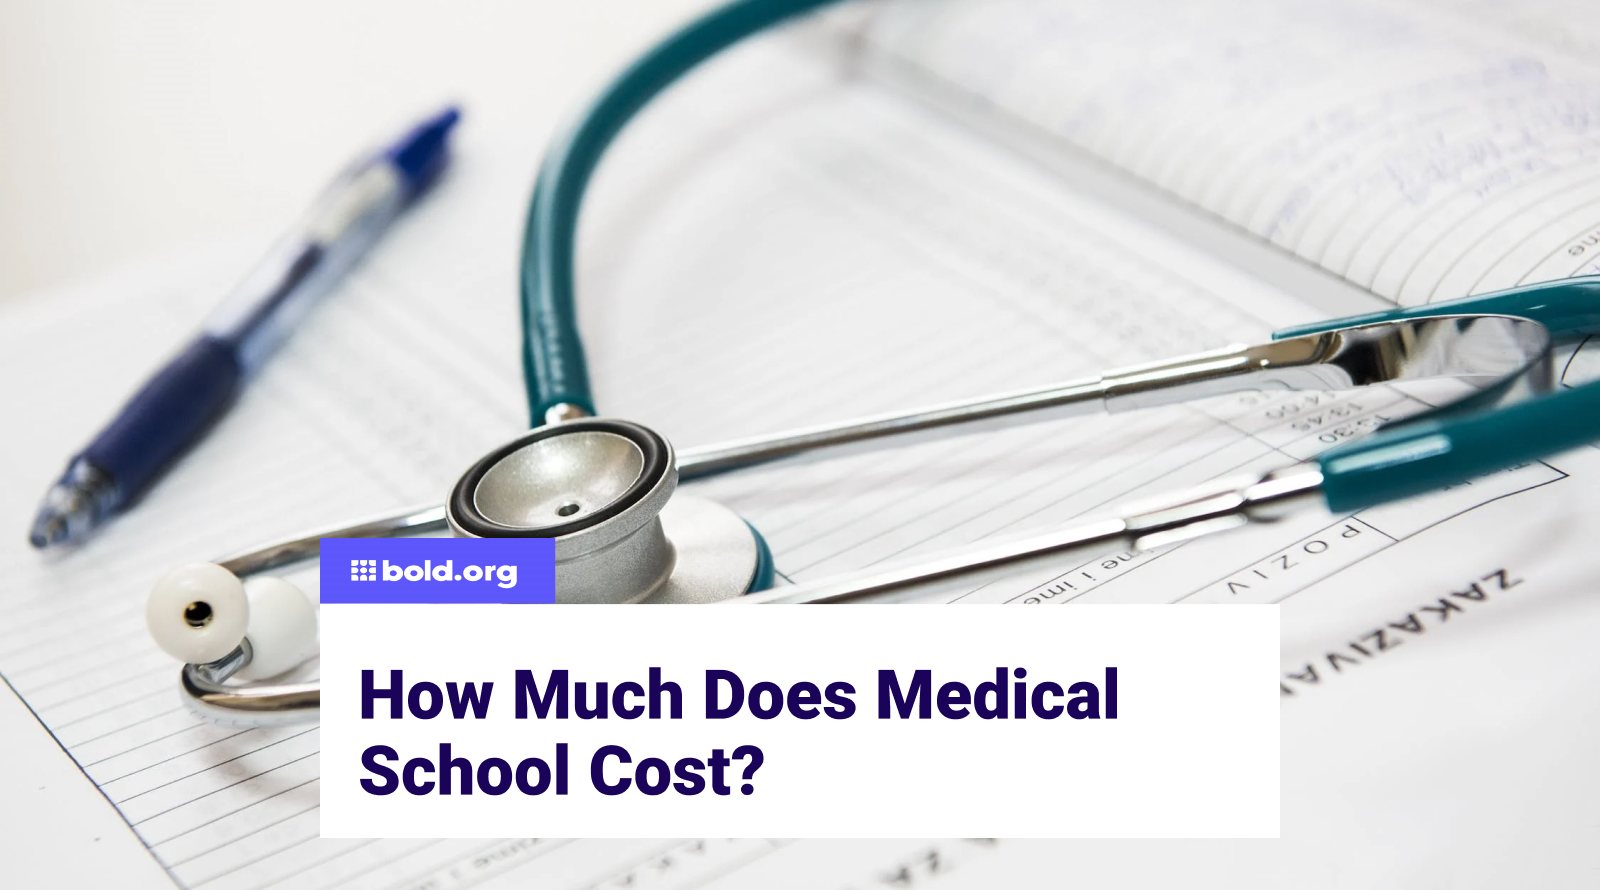 How Much Does Medical School Cost in 2023?